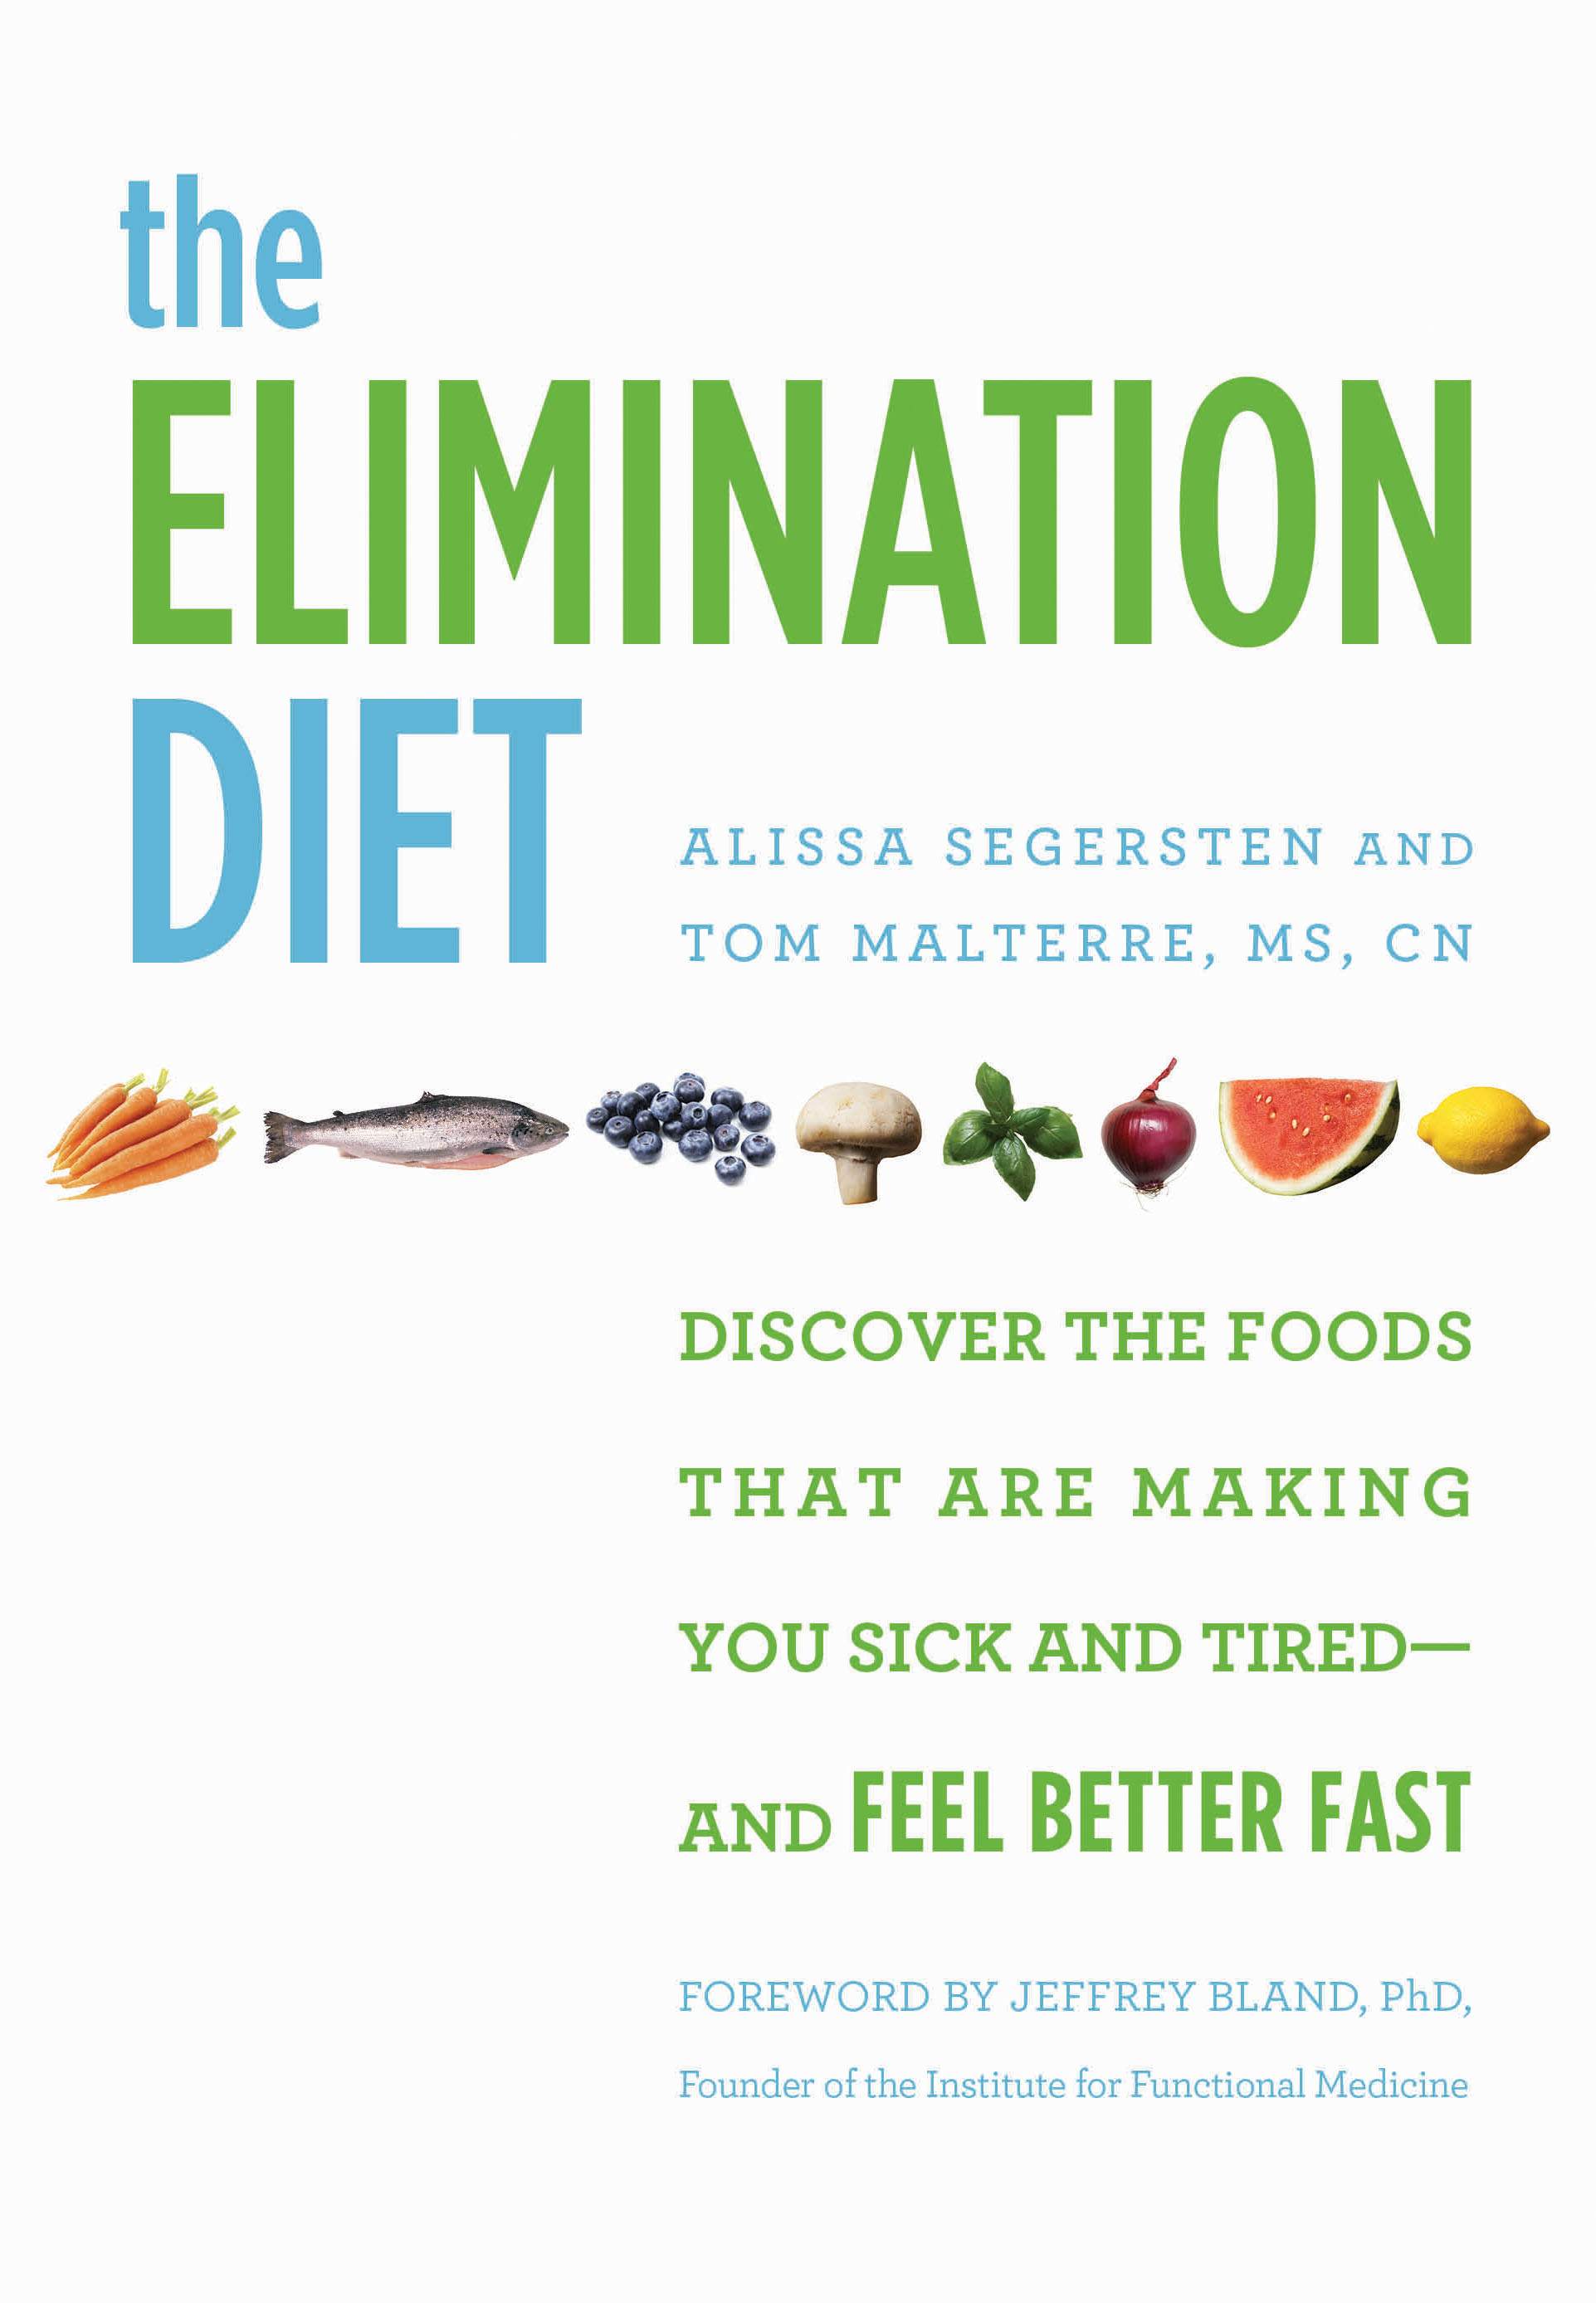 how to find elimination diet